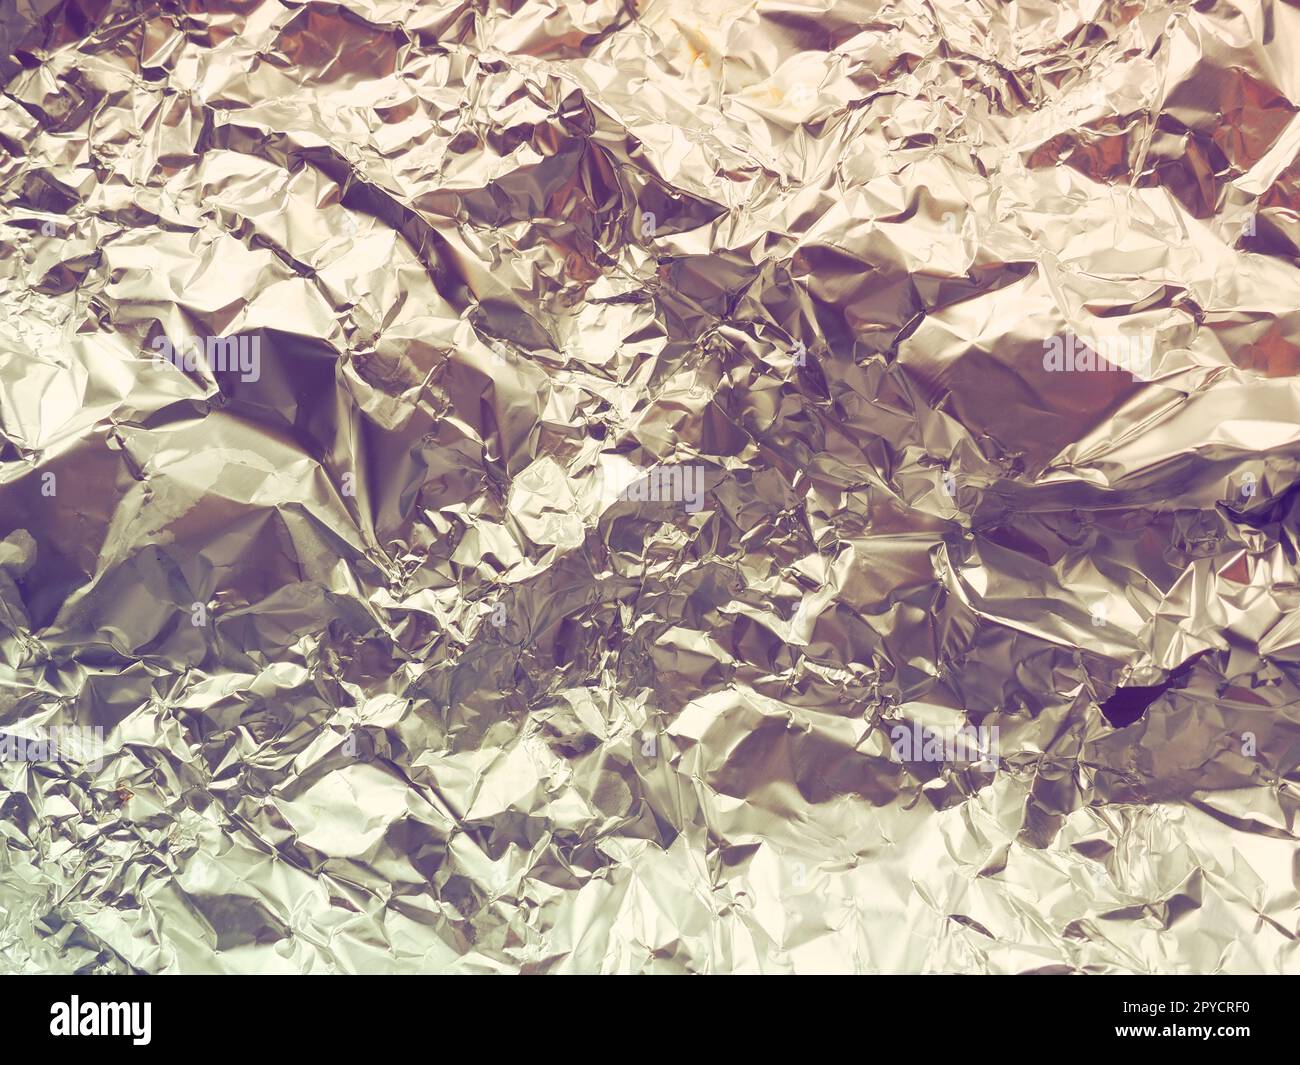 foil close-up. Aluminum gold crumpled foil. Abstract metallic background. Foil for baking food. Background. Retro or vintage style Stock Photo